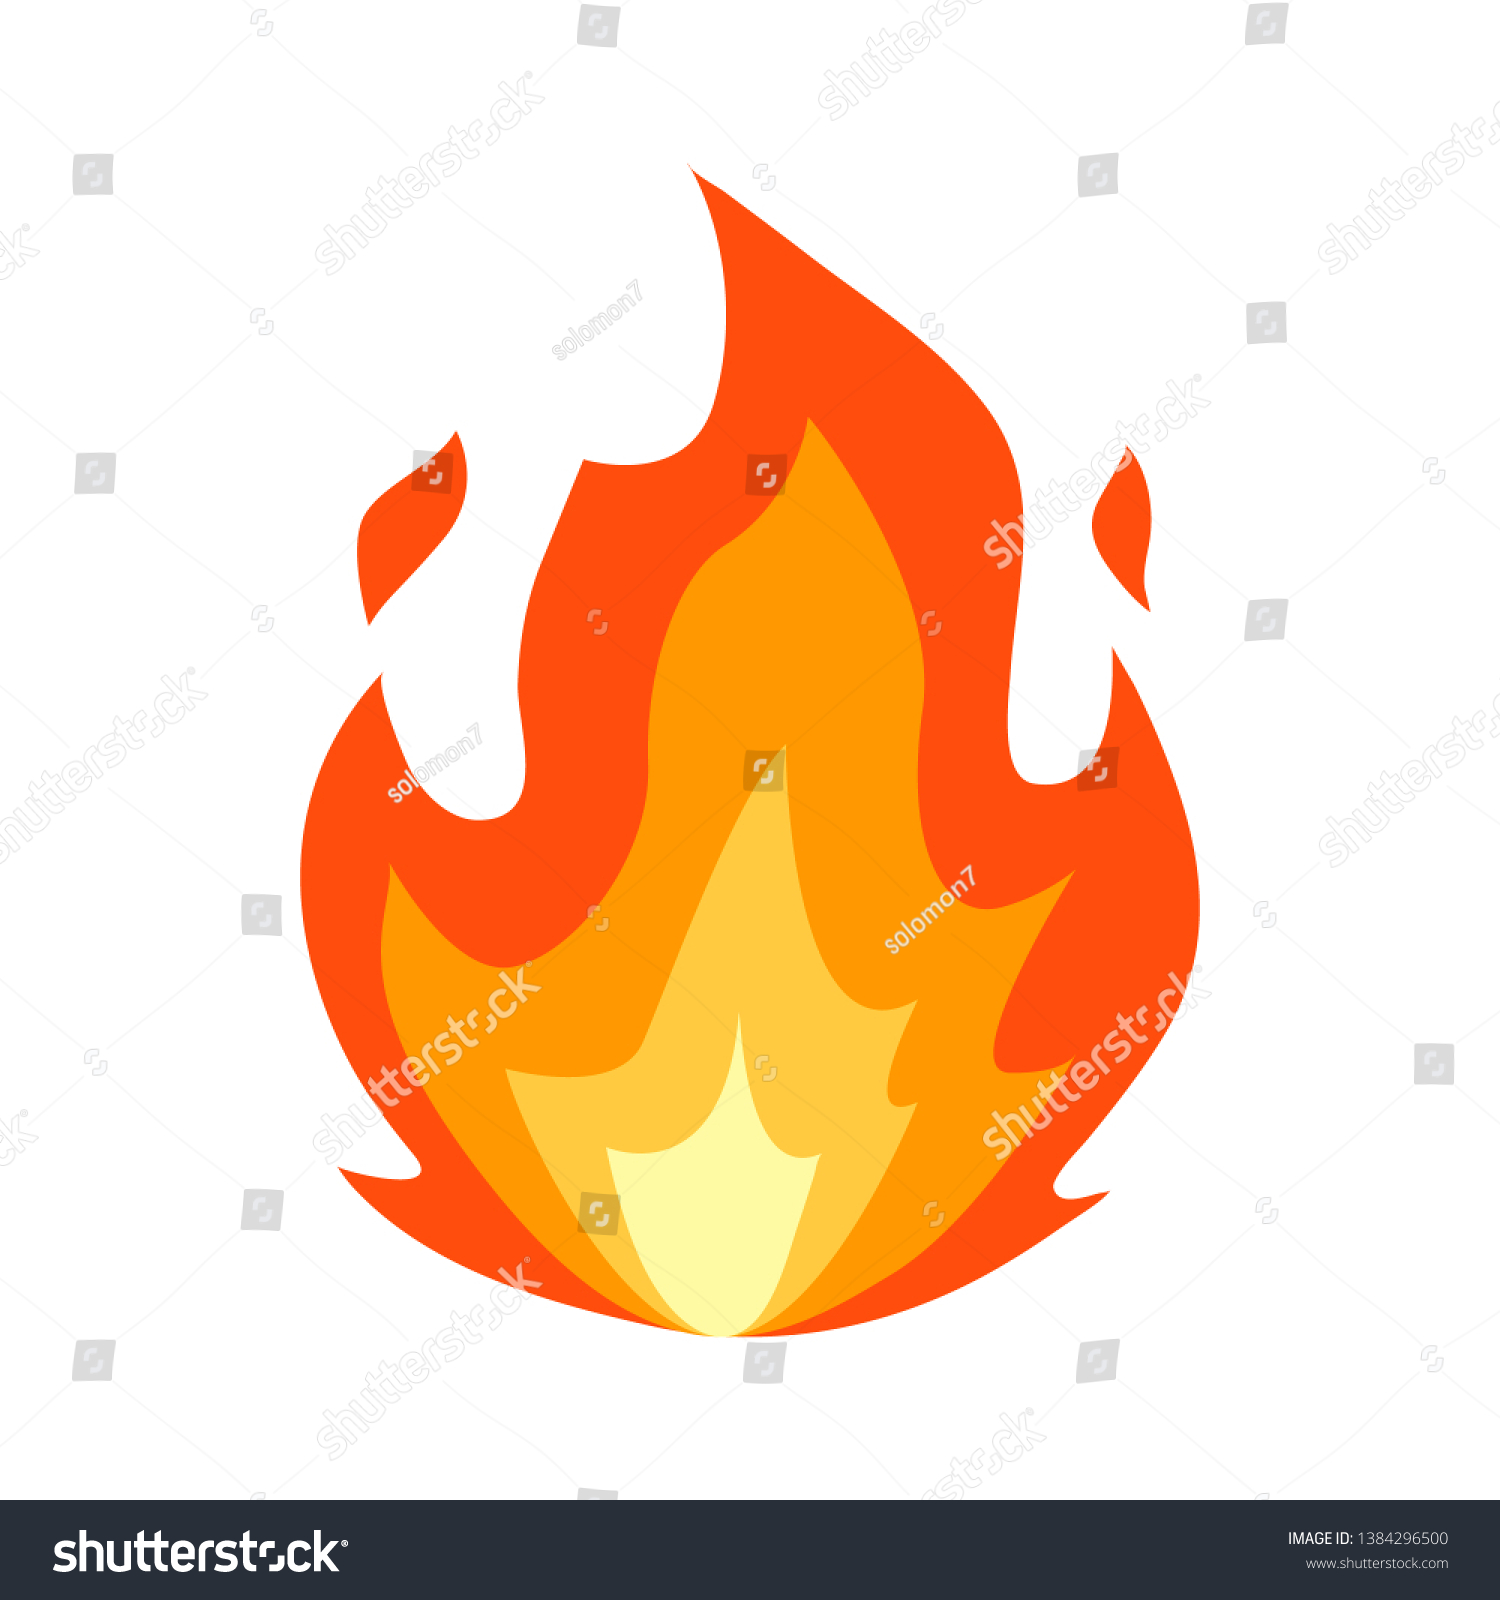 SVG of Fire emoji flames icon isolated on white background. Vector illustration svg